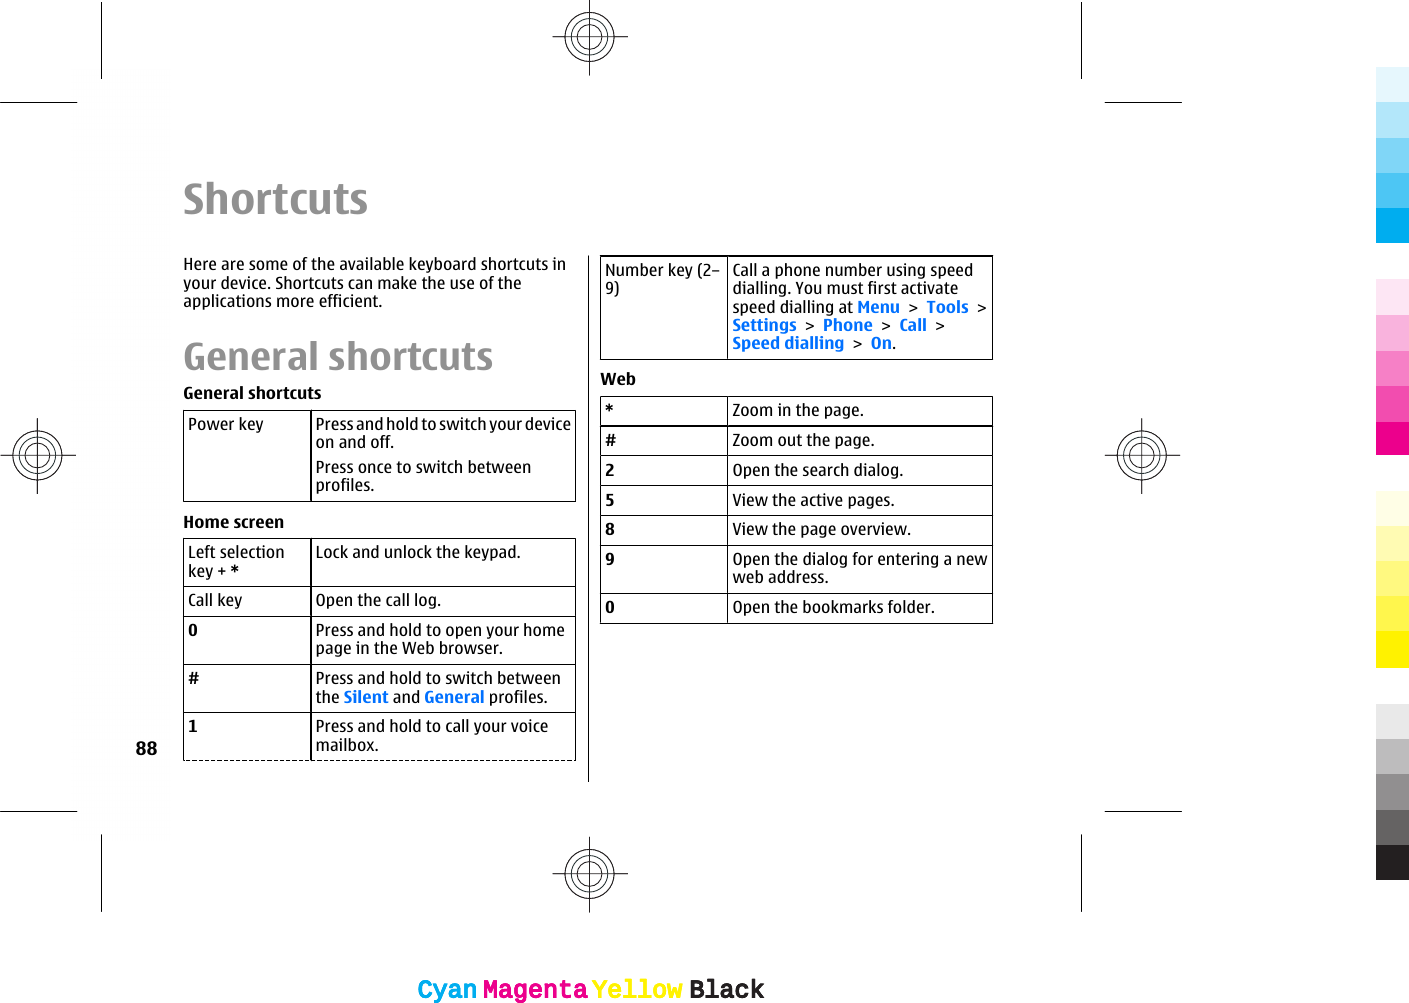 ShortcutsHere are some of the available keyboard shortcuts inyour device. Shortcuts can make the use of theapplications more efficient.General shortcutsGeneral shortcutsPower key Press and hold to switch your deviceon and off.Press once to switch betweenprofiles.Home screenLeft selectionkey + *Lock and unlock the keypad.Call key Open the call log.0Press and hold to open your homepage in the Web browser.#Press and hold to switch betweenthe Silent and General profiles.1Press and hold to call your voicemailbox.Number key (2–9)Call a phone number using speeddialling. You must first activatespeed dialling at Menu &gt; Tools &gt;Settings &gt; Phone &gt; Call &gt;Speed dialling &gt; On.Web*Zoom in the page.#Zoom out the page.2Open the search dialog.5View the active pages.8View the page overview.9Open the dialog for entering a newweb address.0Open the bookmarks folder.88CyanCyanMagentaMagentaYellowYellowBlackBlackCyanCyanMagentaMagentaYellowYellowBlackBlack